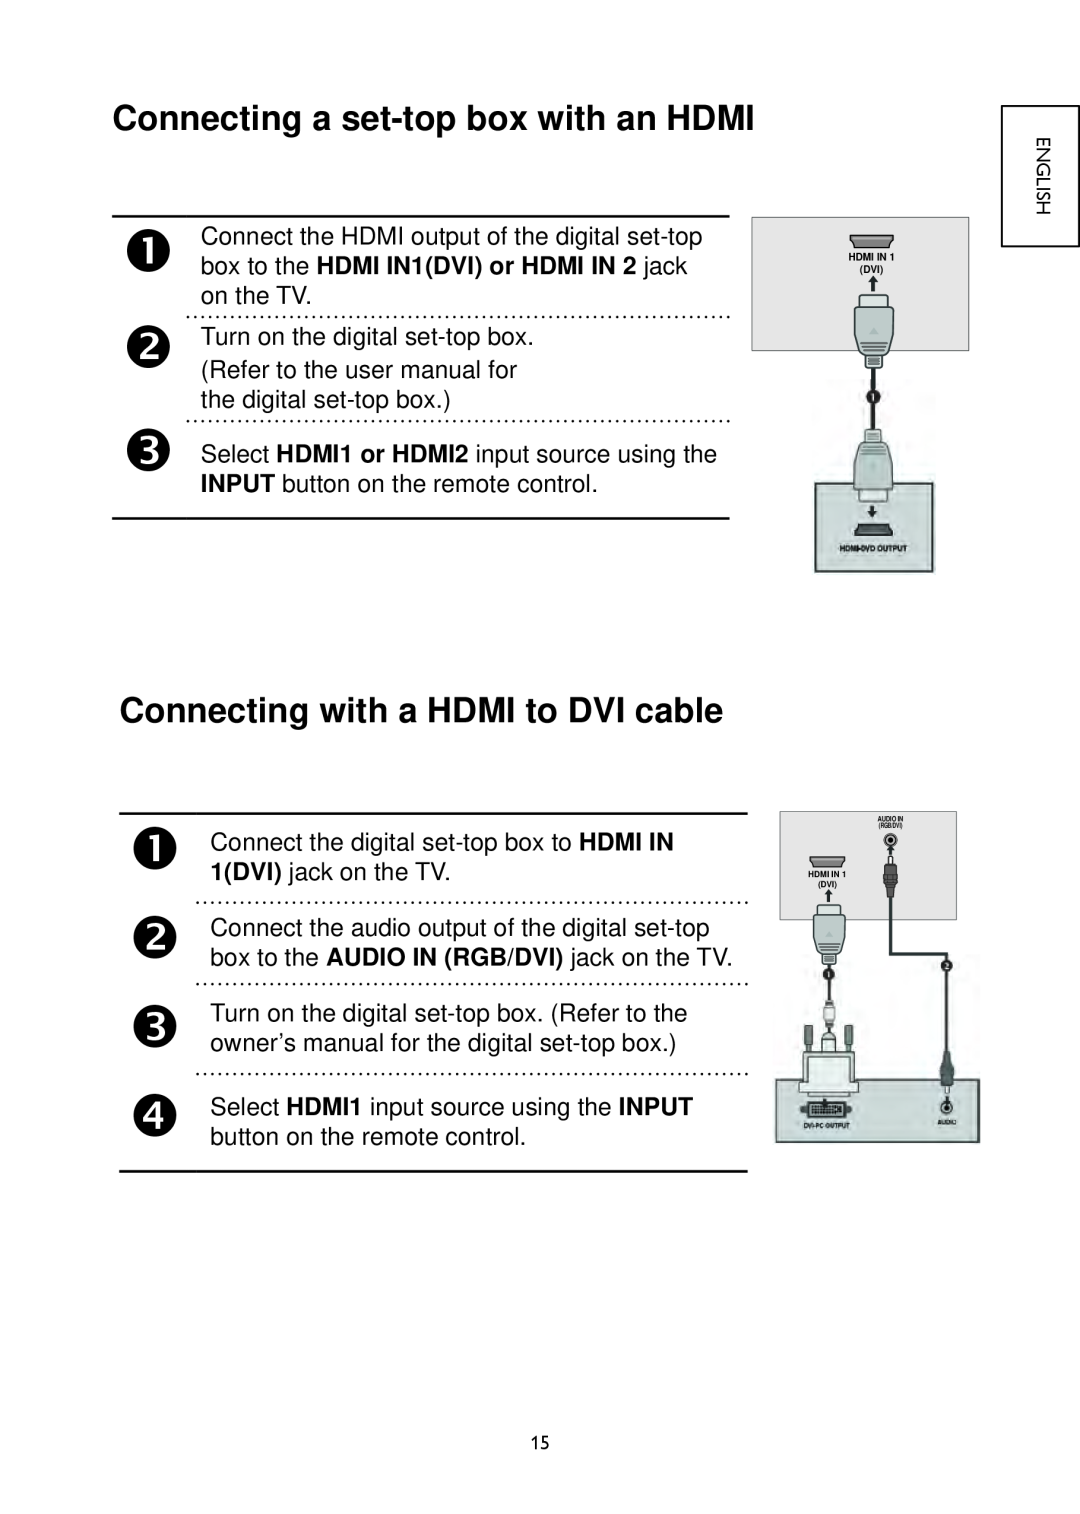 Hitachi 19LD4550U, 32LD4550U, 32LD4550C Connecting a set-top box with an HDMI, Connecting with a HDMI to DVI cable 